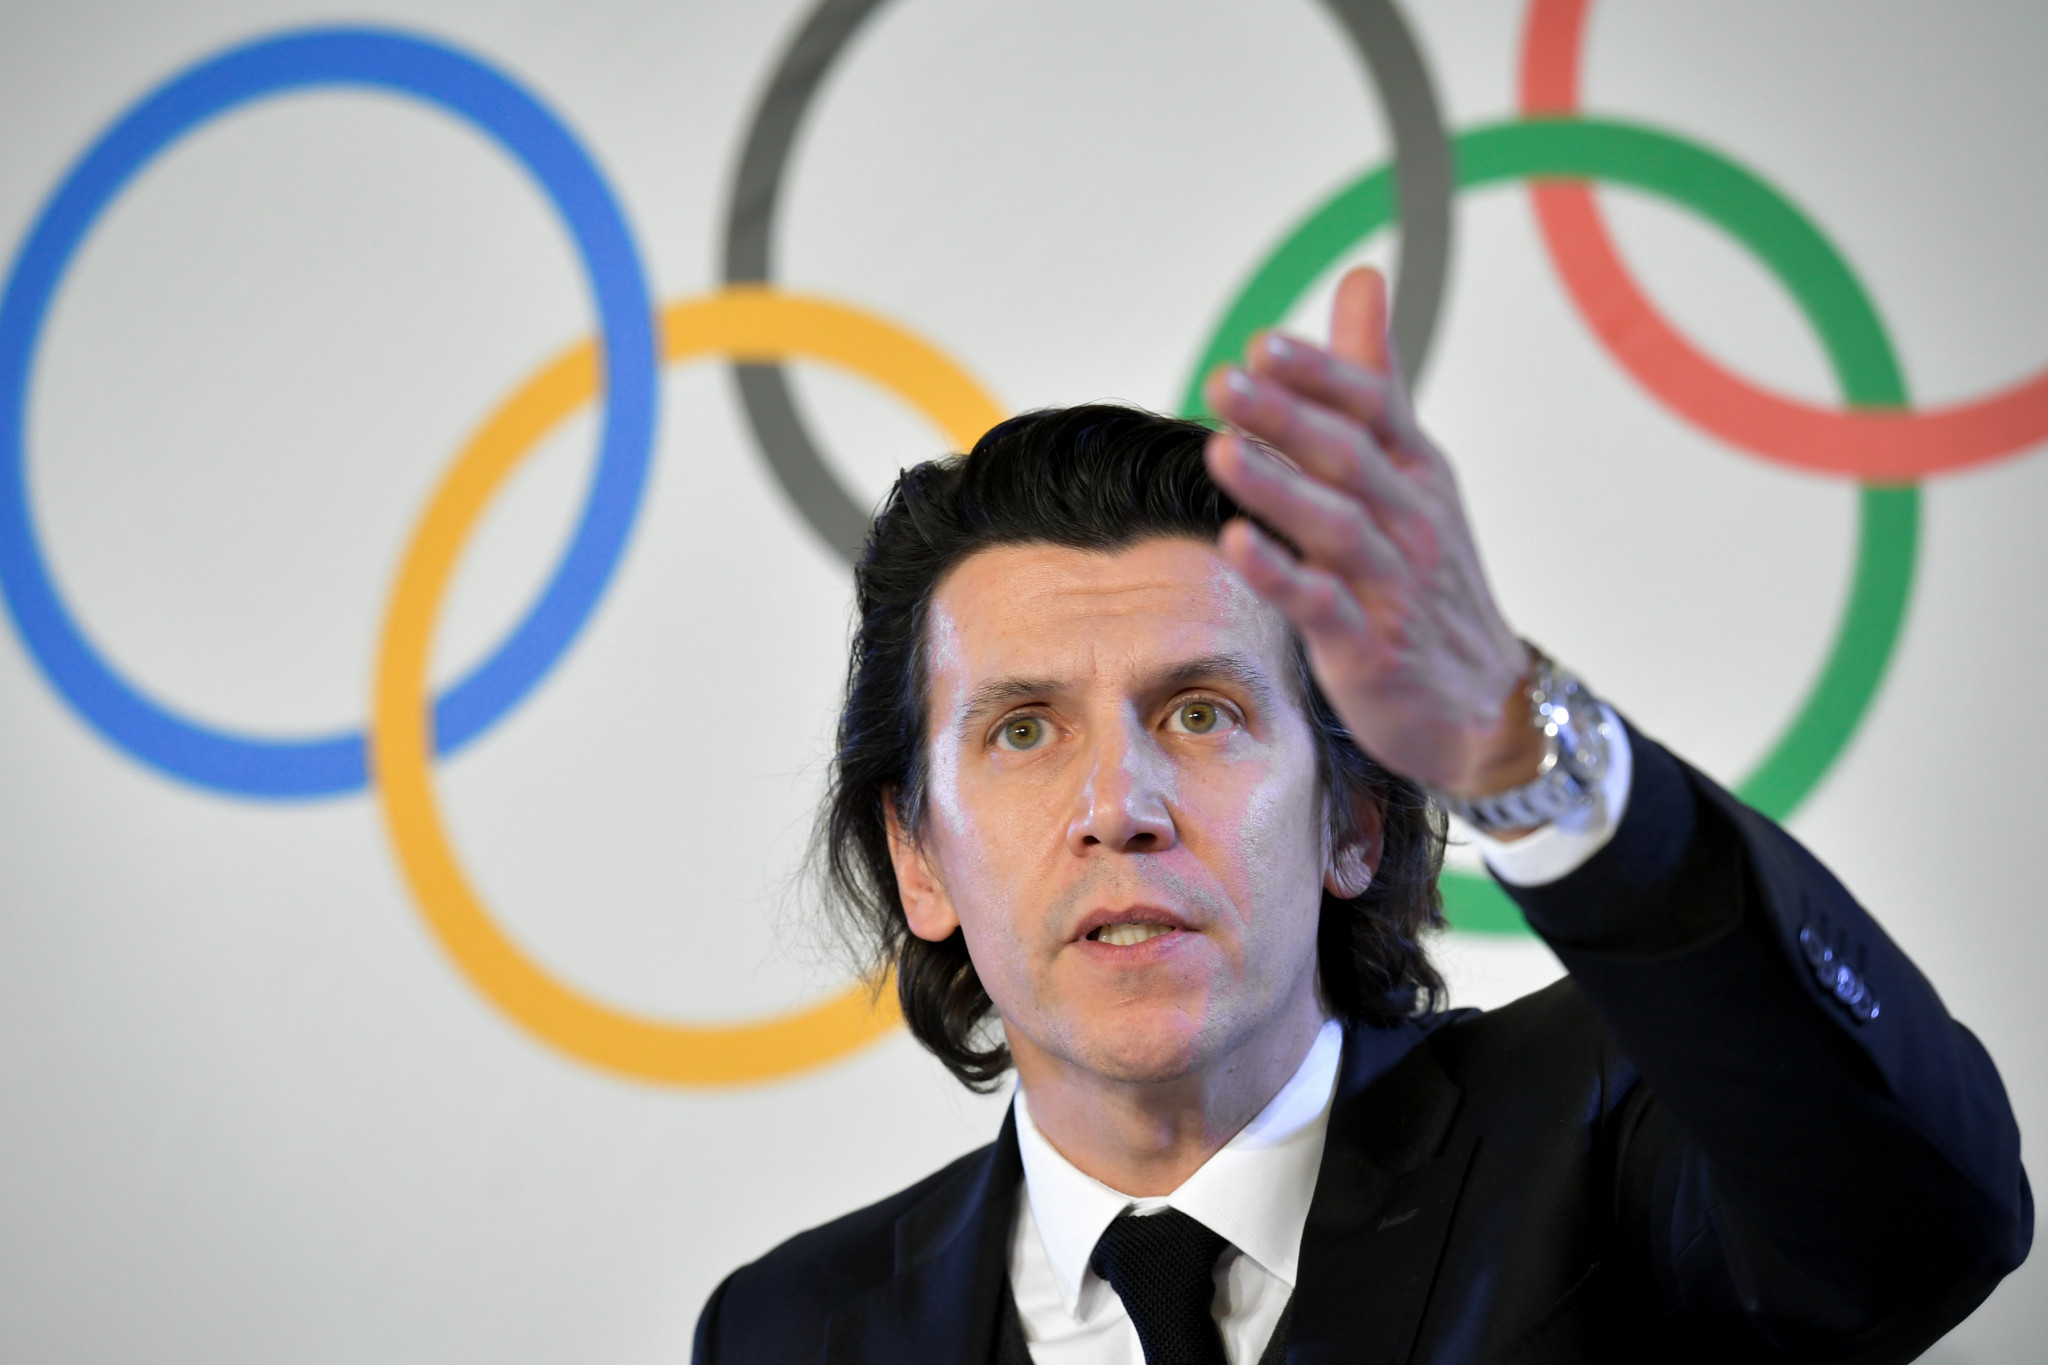 Dubi confident in staying power of 2026 Winter Olympic and Paralympic bid candidates